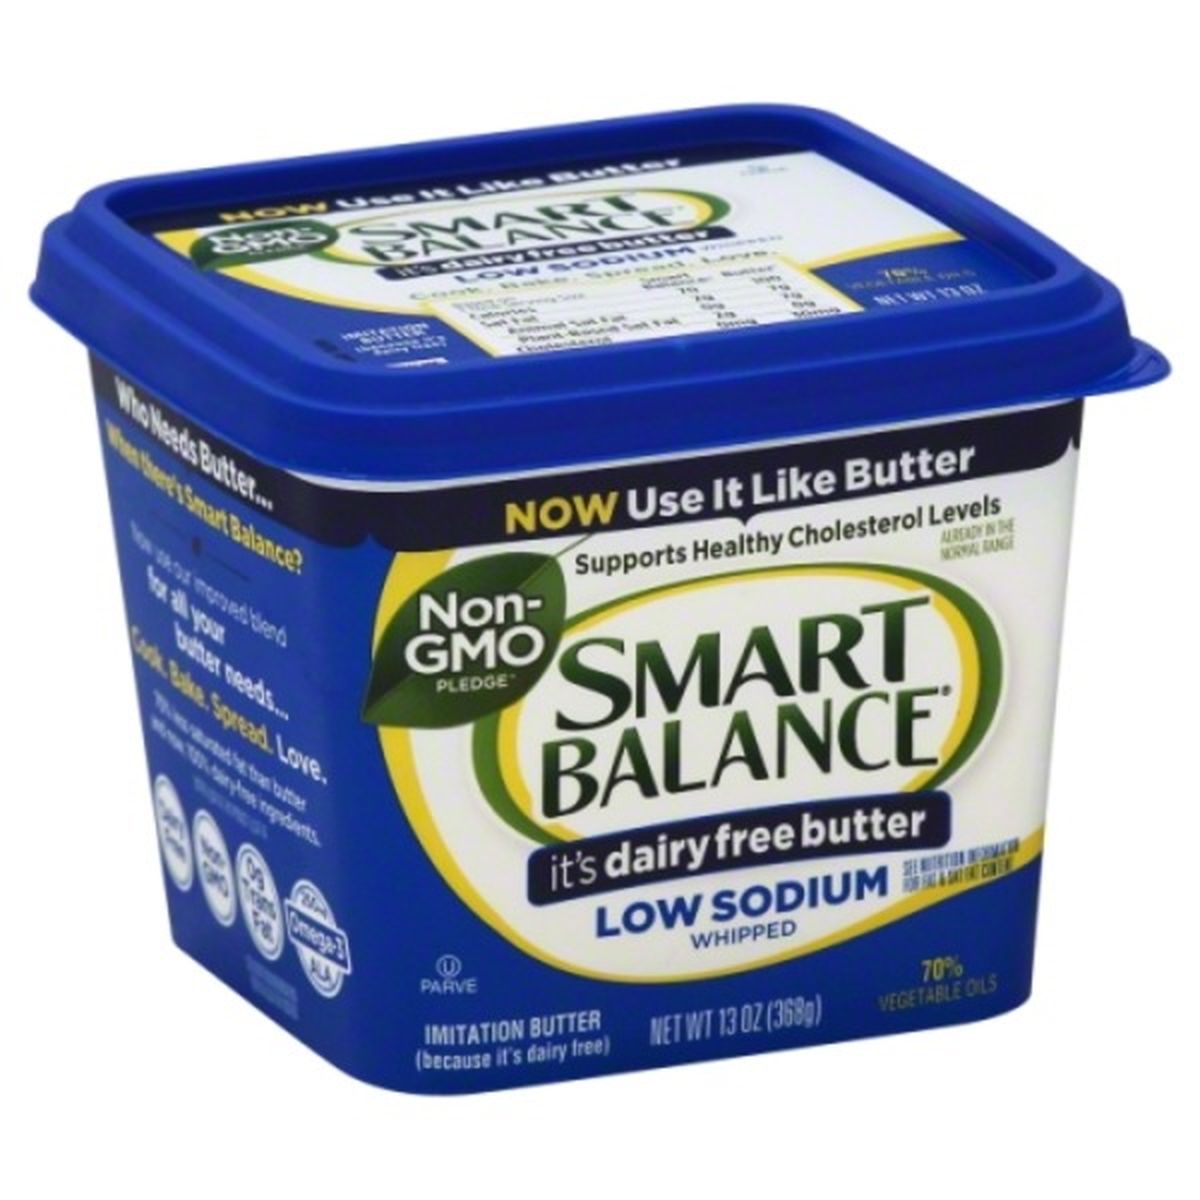 Calories in Smart Balance Imitation Butter, Low Sodium, Whipped